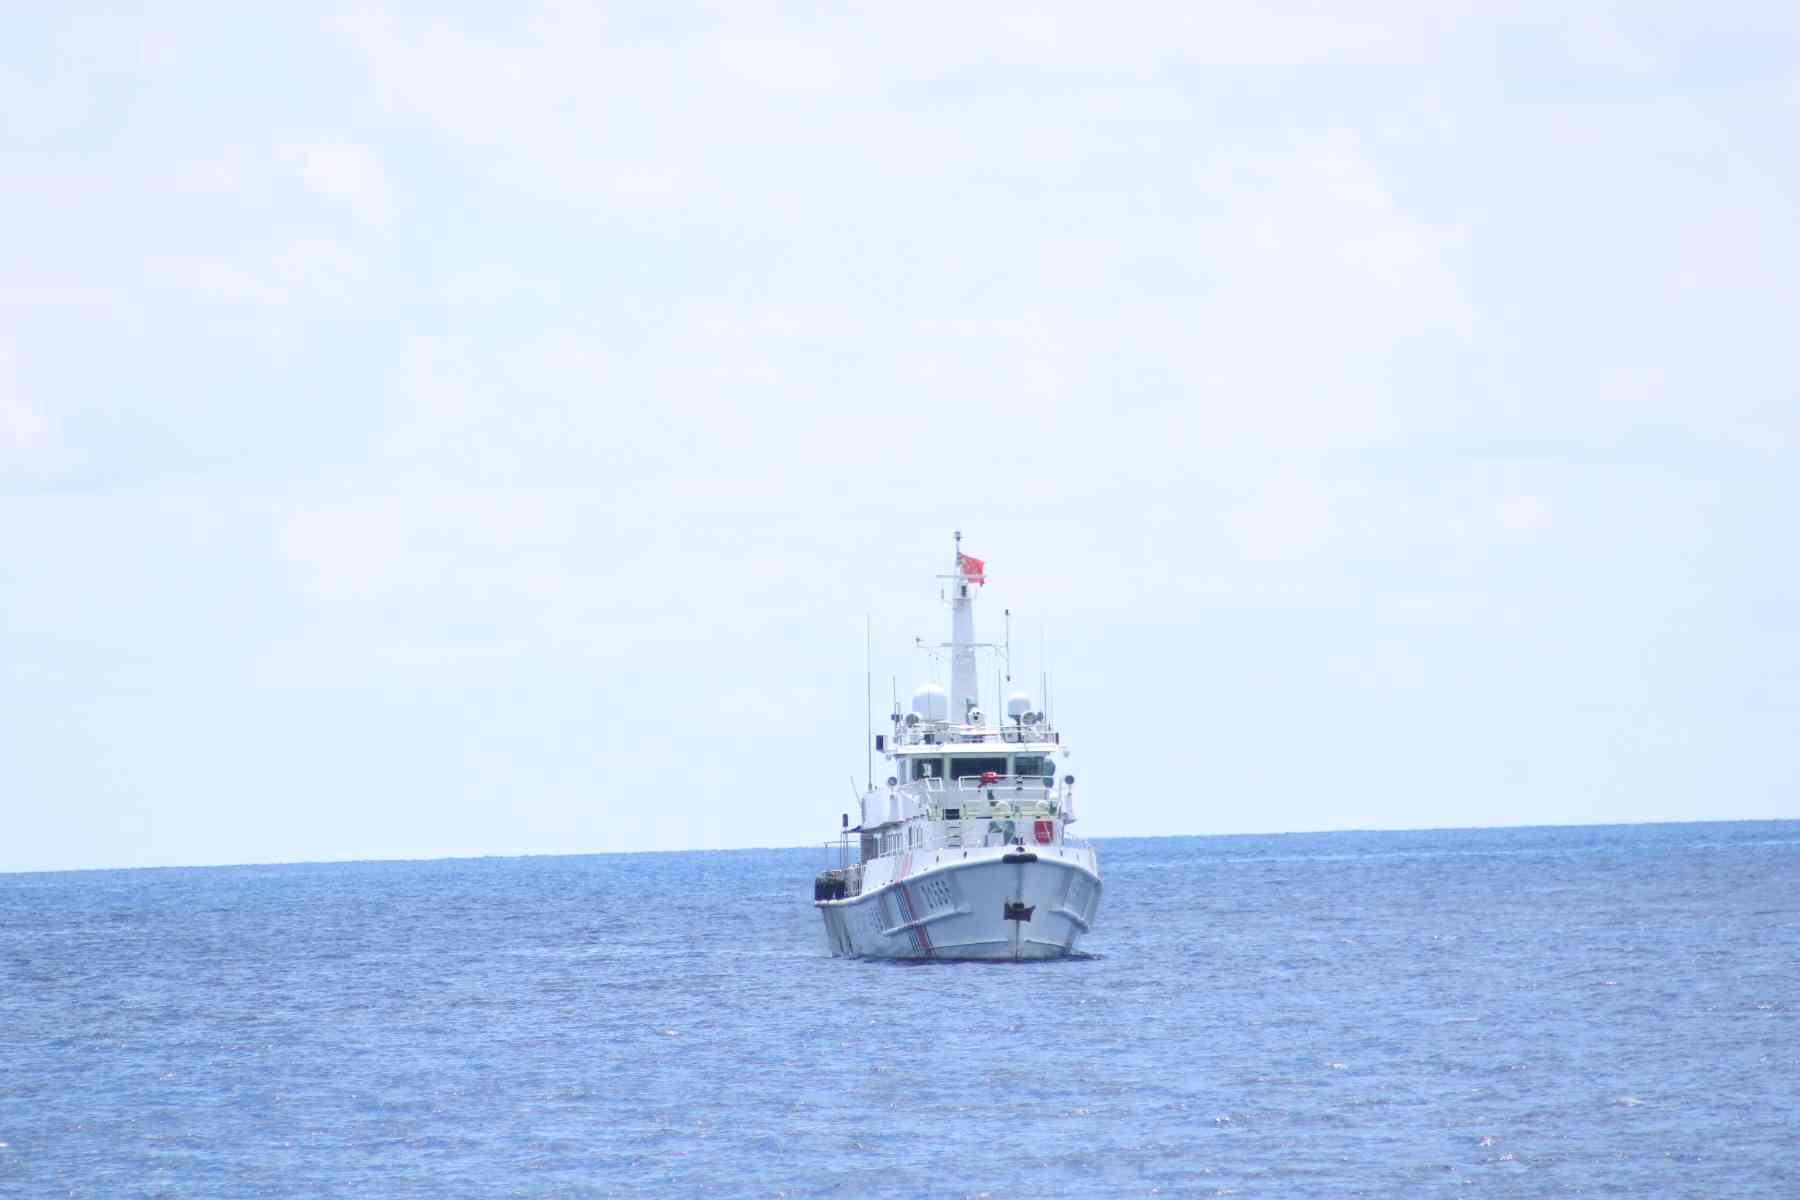 Chinese vessel bumped by PH ship in South China Sea — CCG